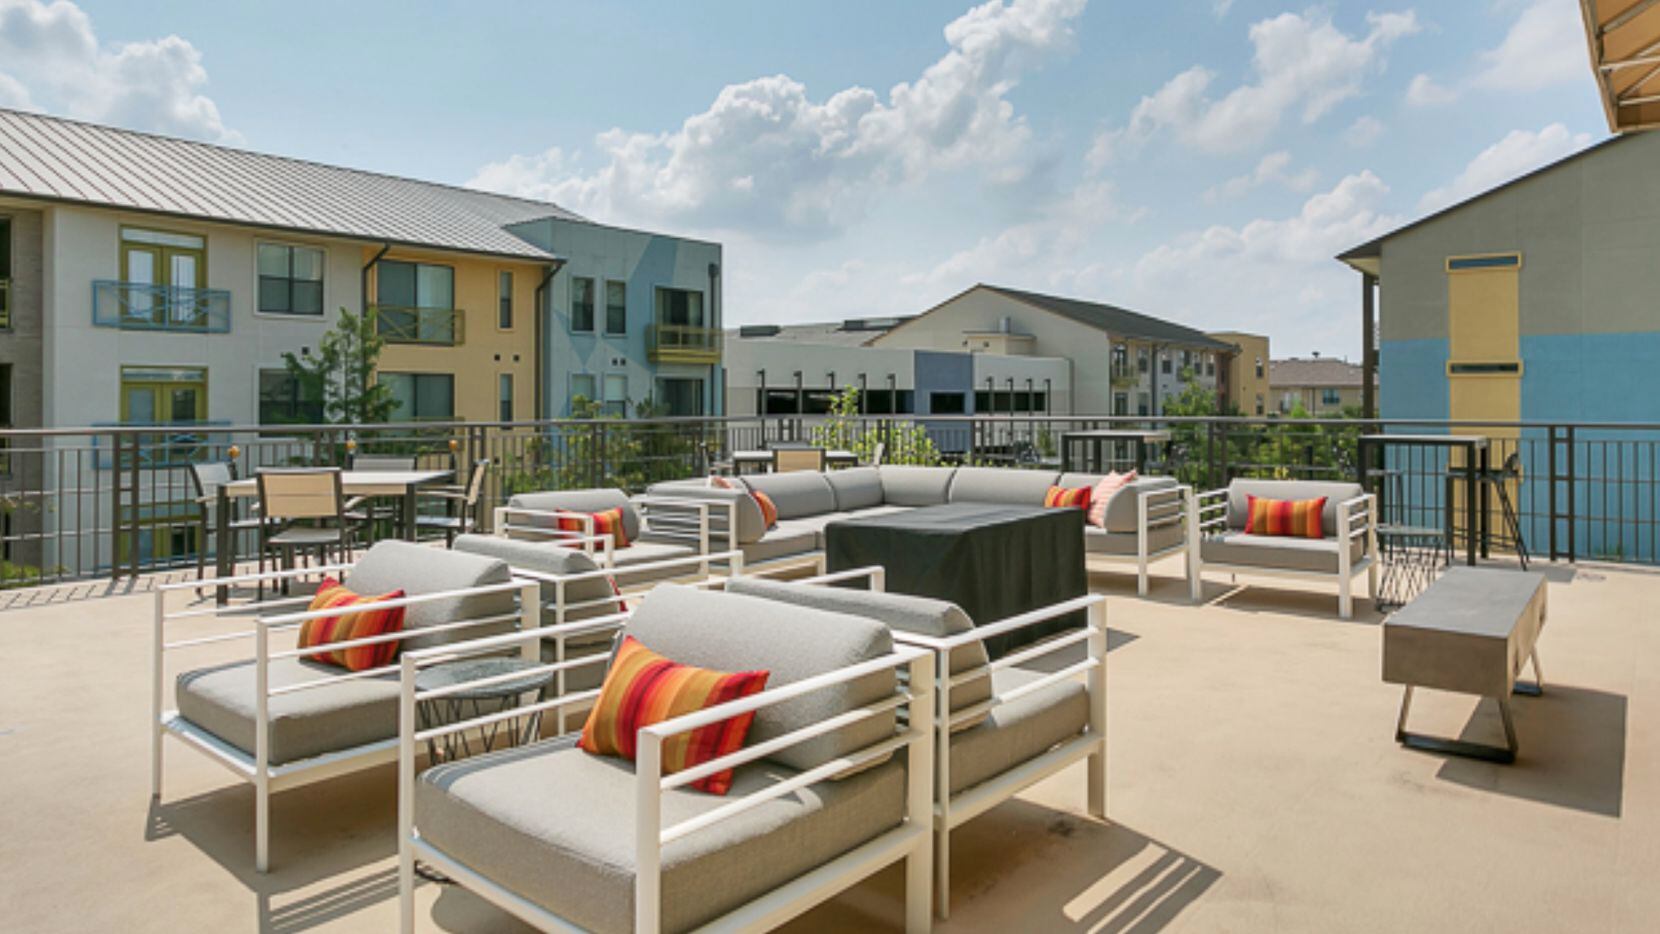 The Legacy North apartments in Plano have almost 1,700 units.